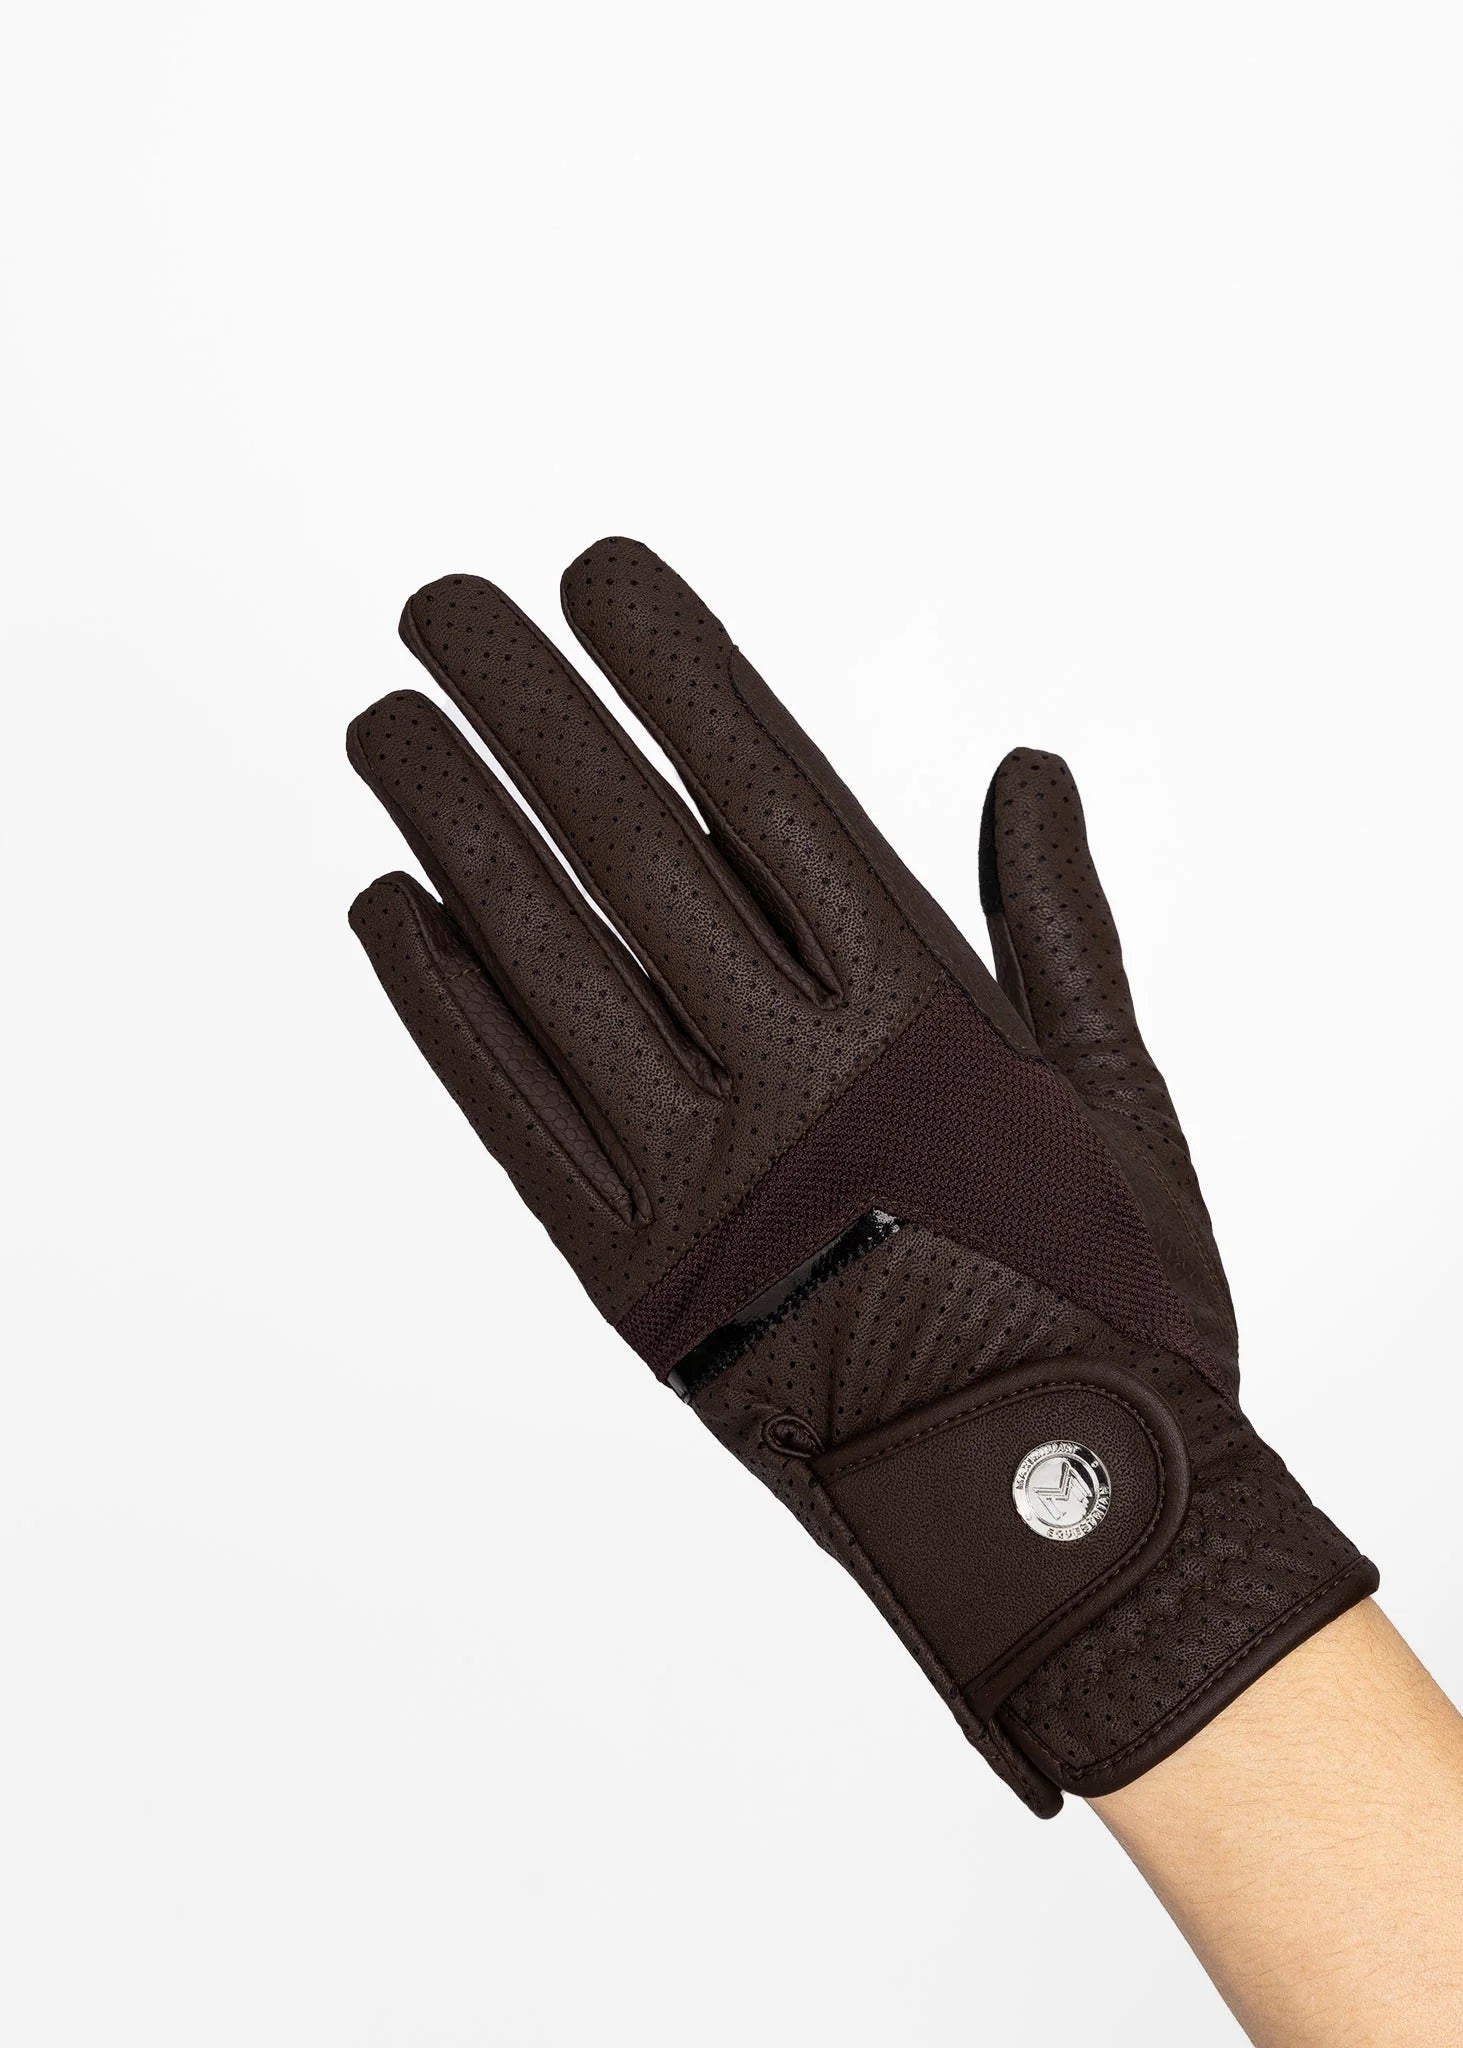 Max Riding Gloves - Chocolate